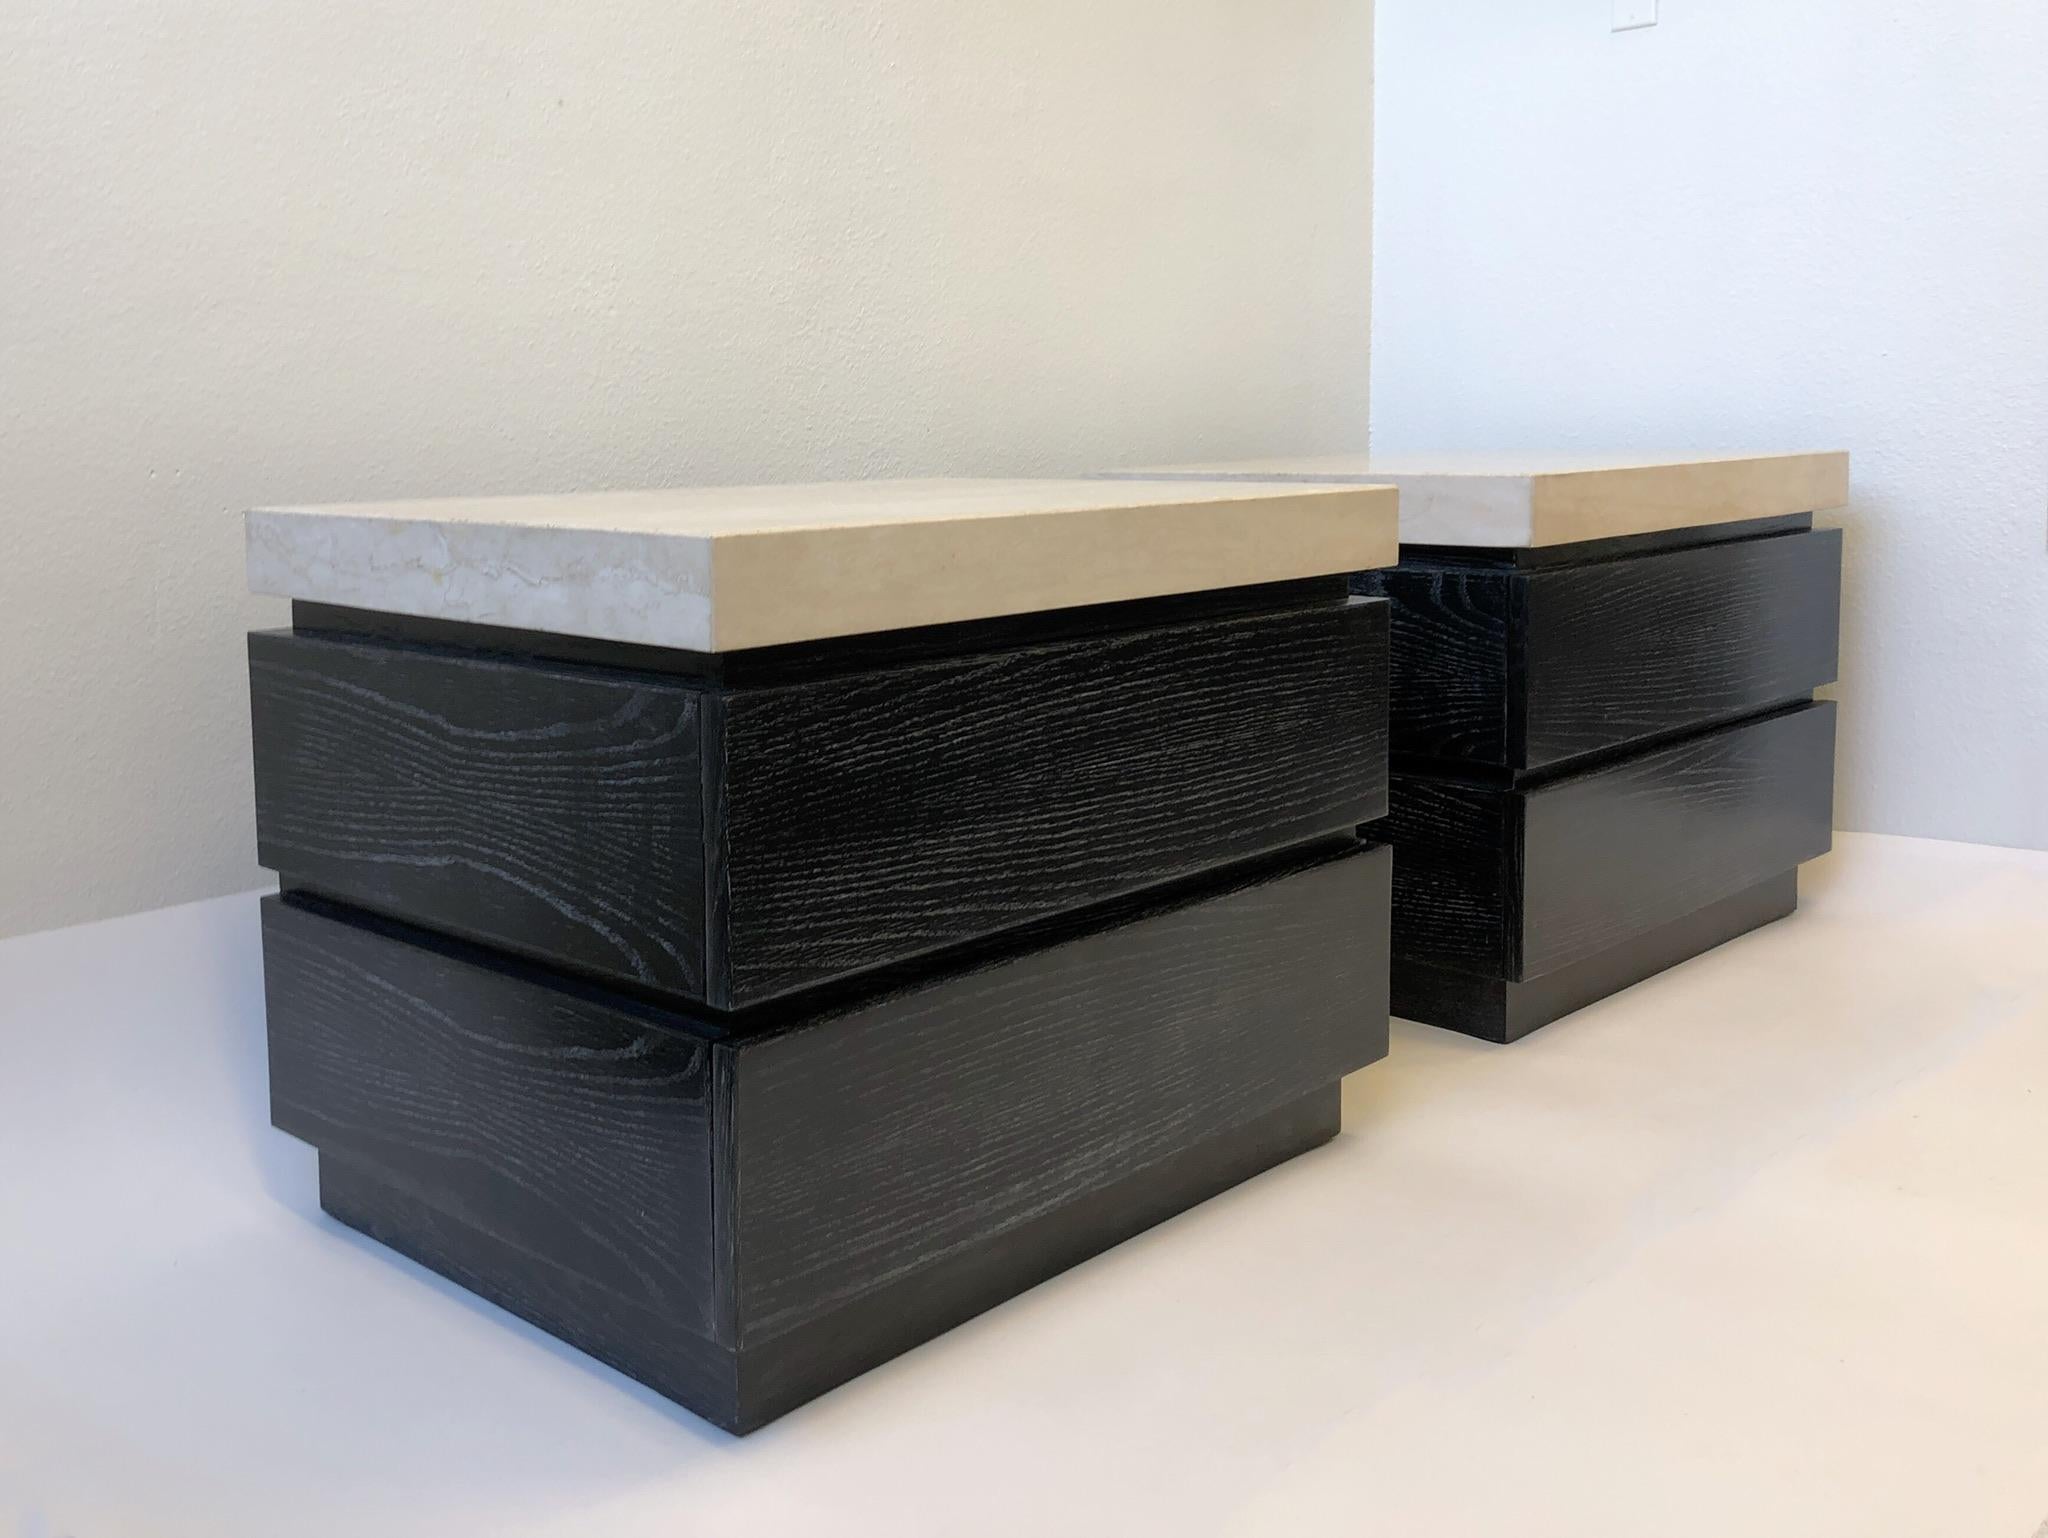 A pair of beautiful black cerused oak, two drawers nightstand with travertine tops design by Kreiss in the 1980s.
Newly professionally lacquered.
Dimension: 32” wide, 24” deep, 24” high.